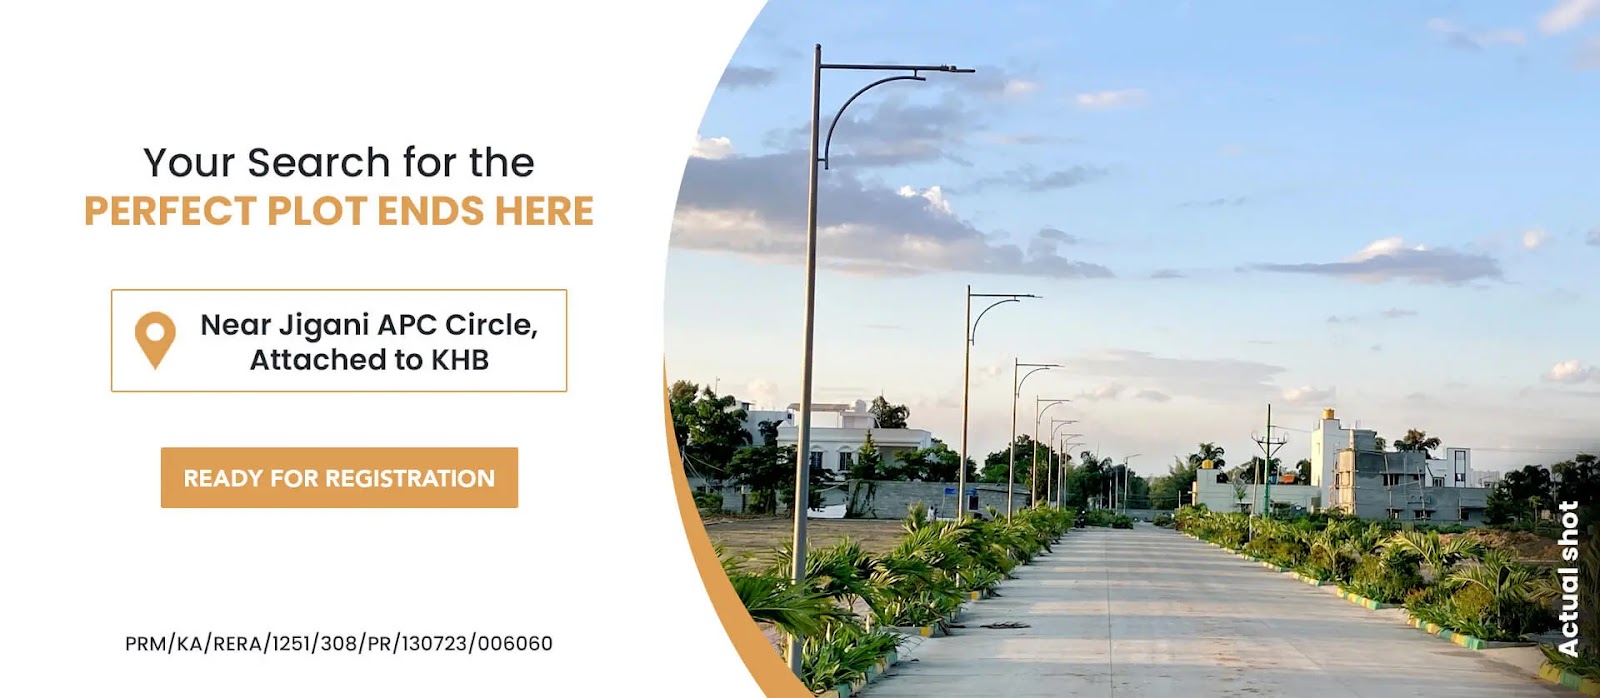 Aashrithaa Divine offers APA approved plots for sale in prime Jigani APC. Invest in your dream property on Jigani Road and seize this opportunity now!
